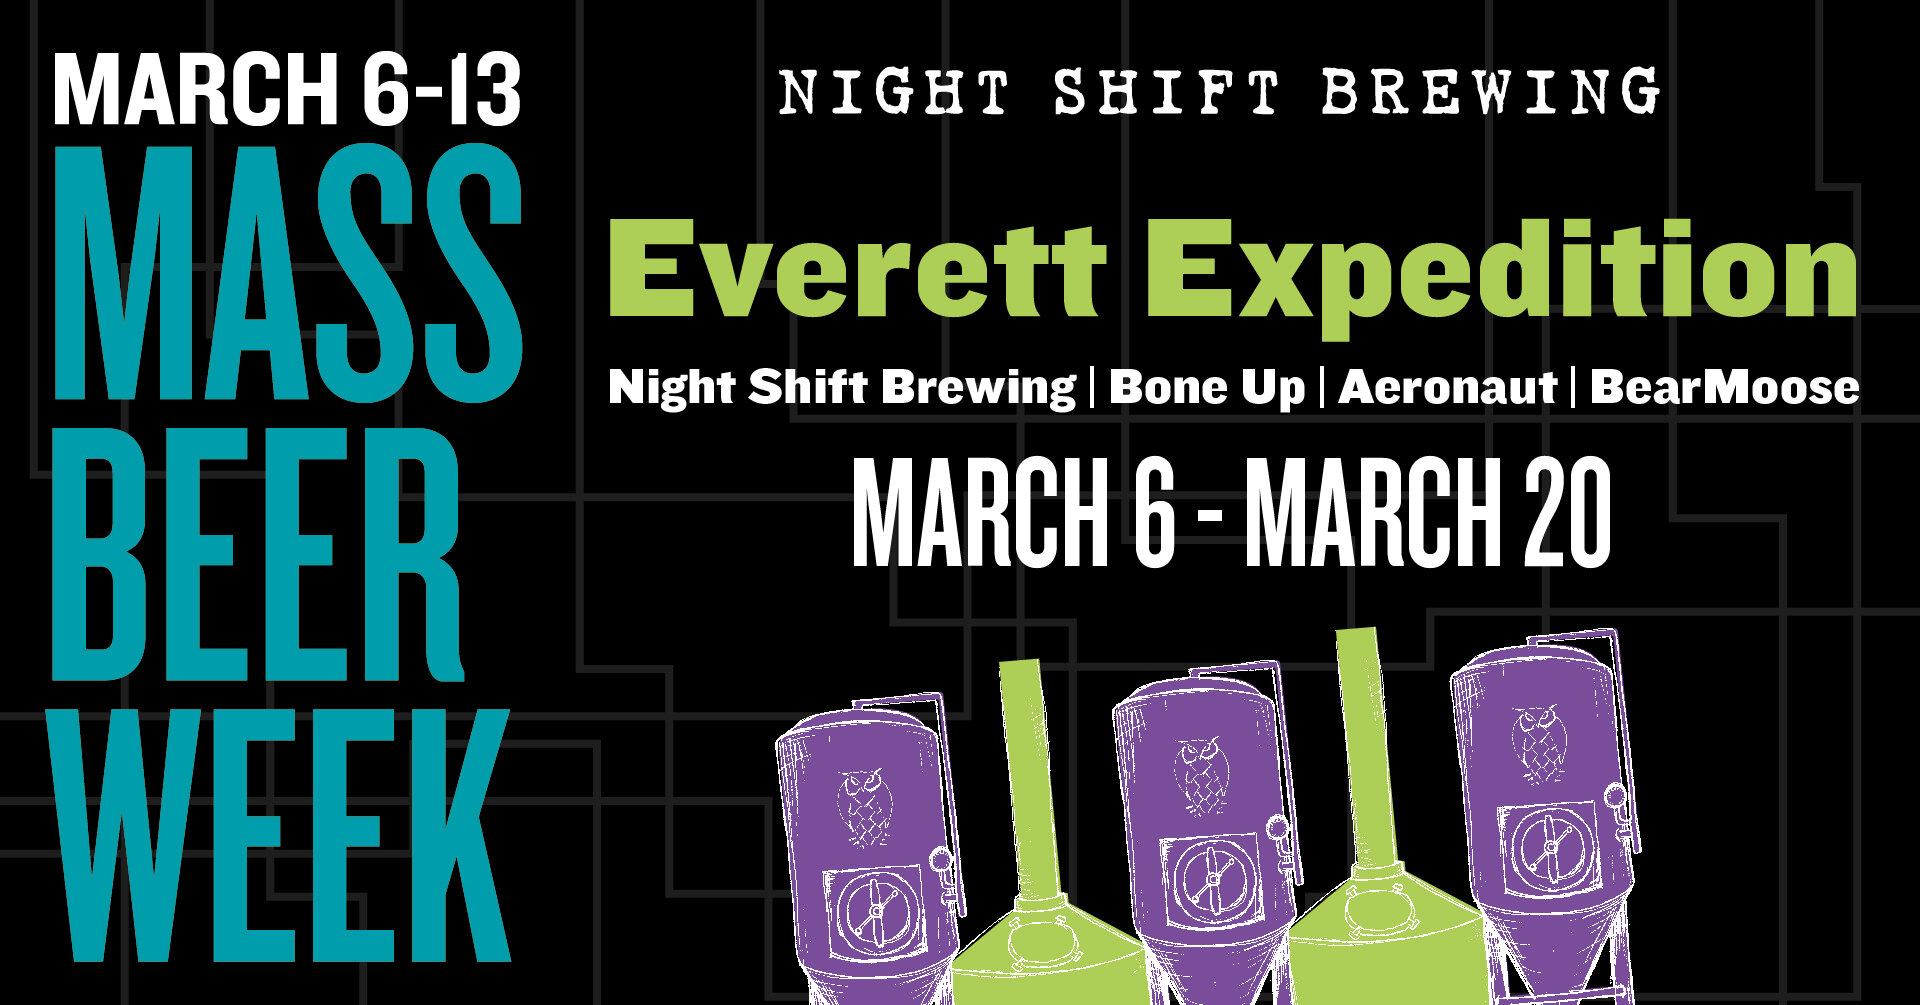 Night Shift Brewing Expansion - Chapman Construction